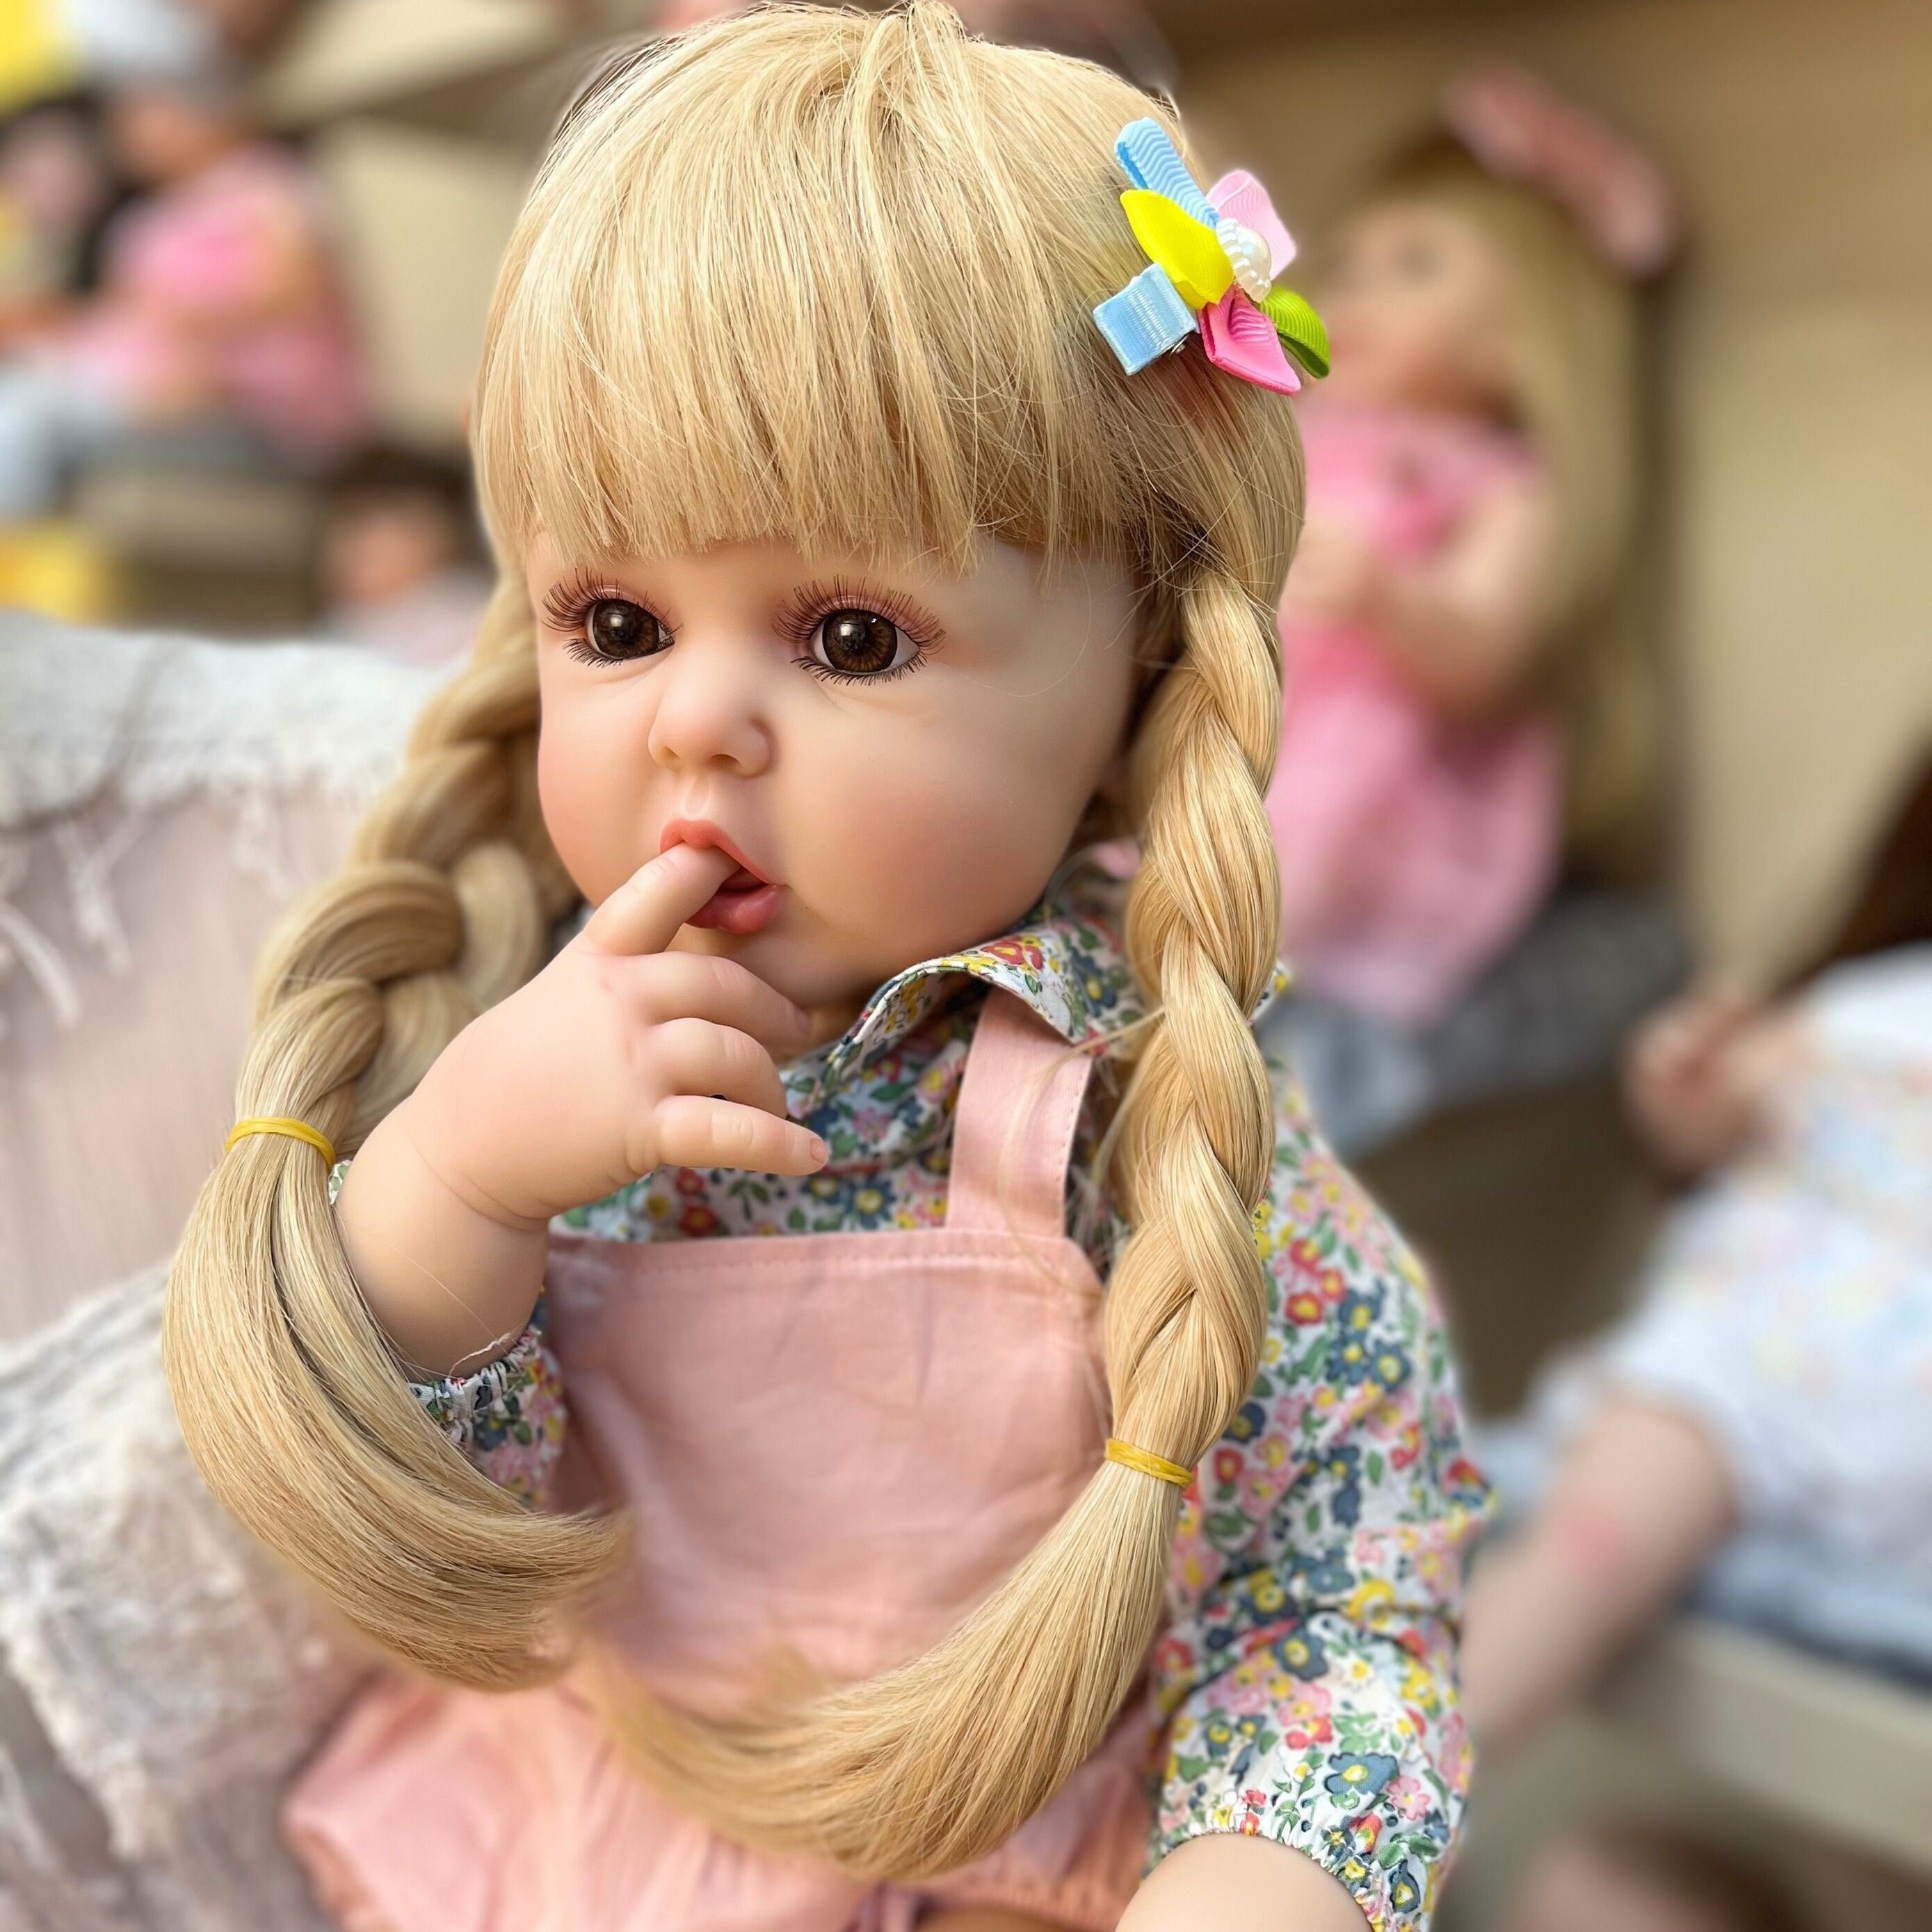 MNMJ Lifelike reborn baby dolls silicone full body & weighted soft cloth body boys girls realistic newborn babeis dolls that look real and feel real life baby dolls toys adorable toddler princess girl birthday gift for ages 3+ year olds kids children